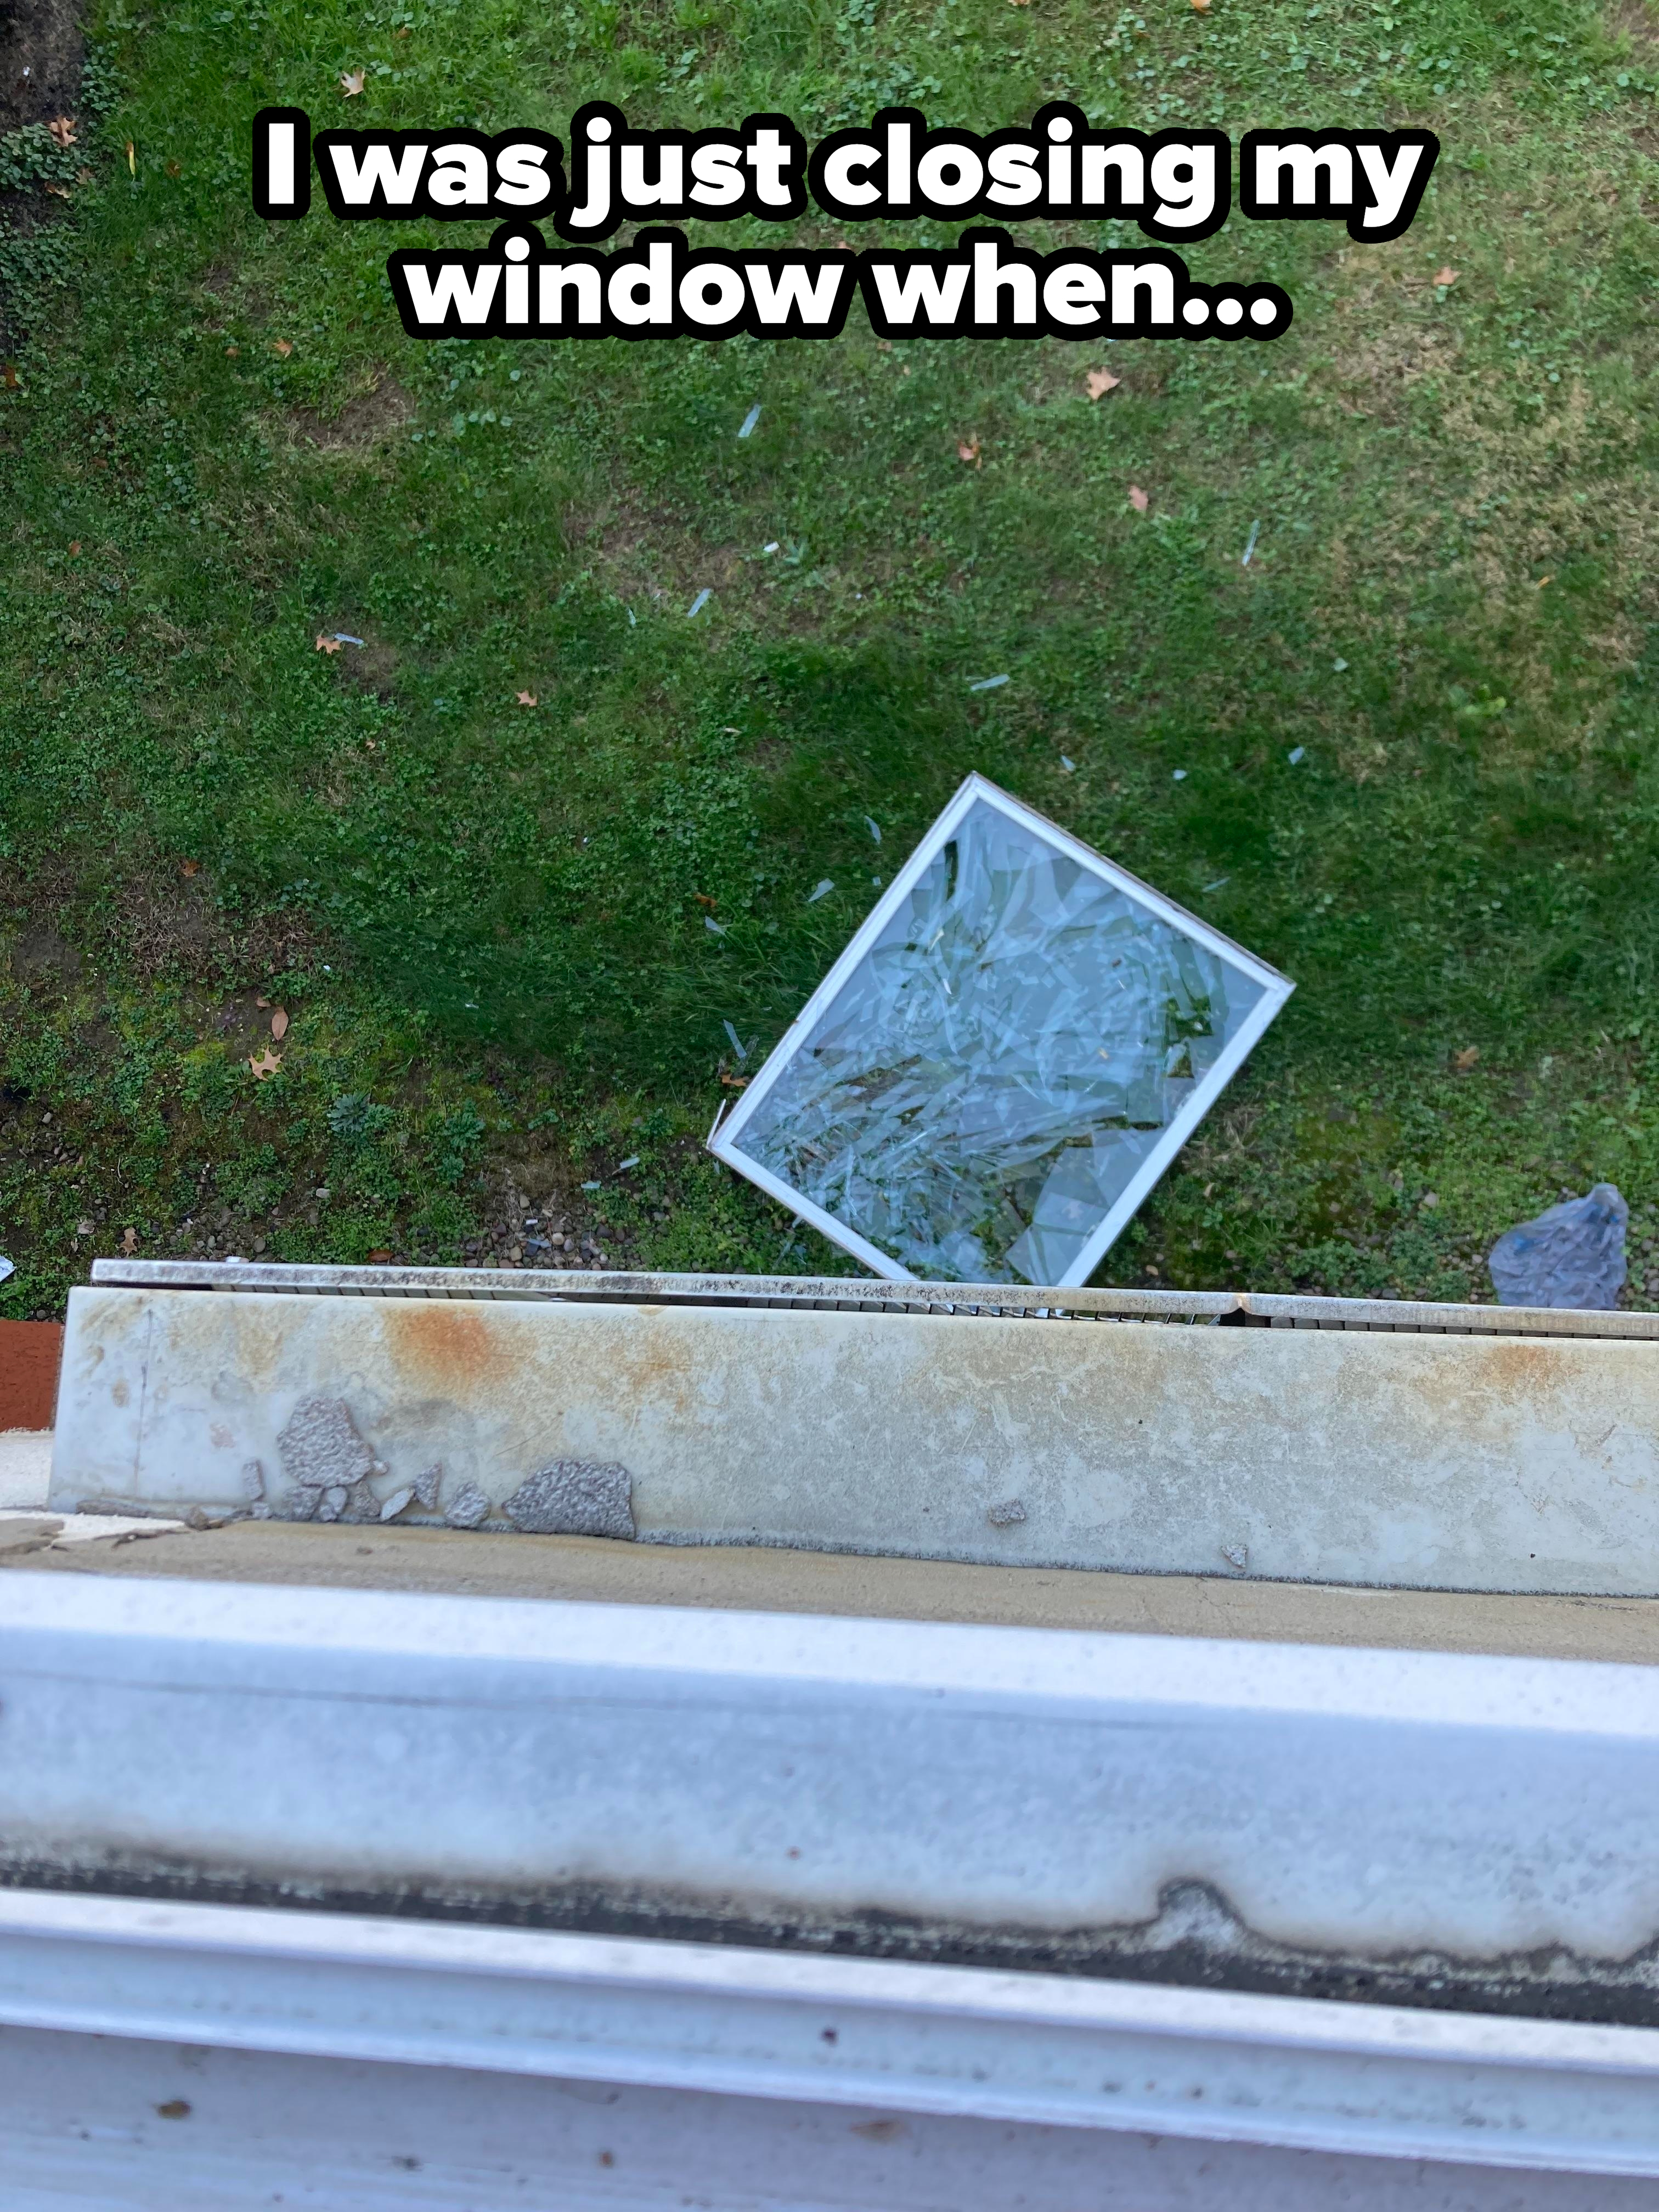 &quot;I just closed my window when...&quot;